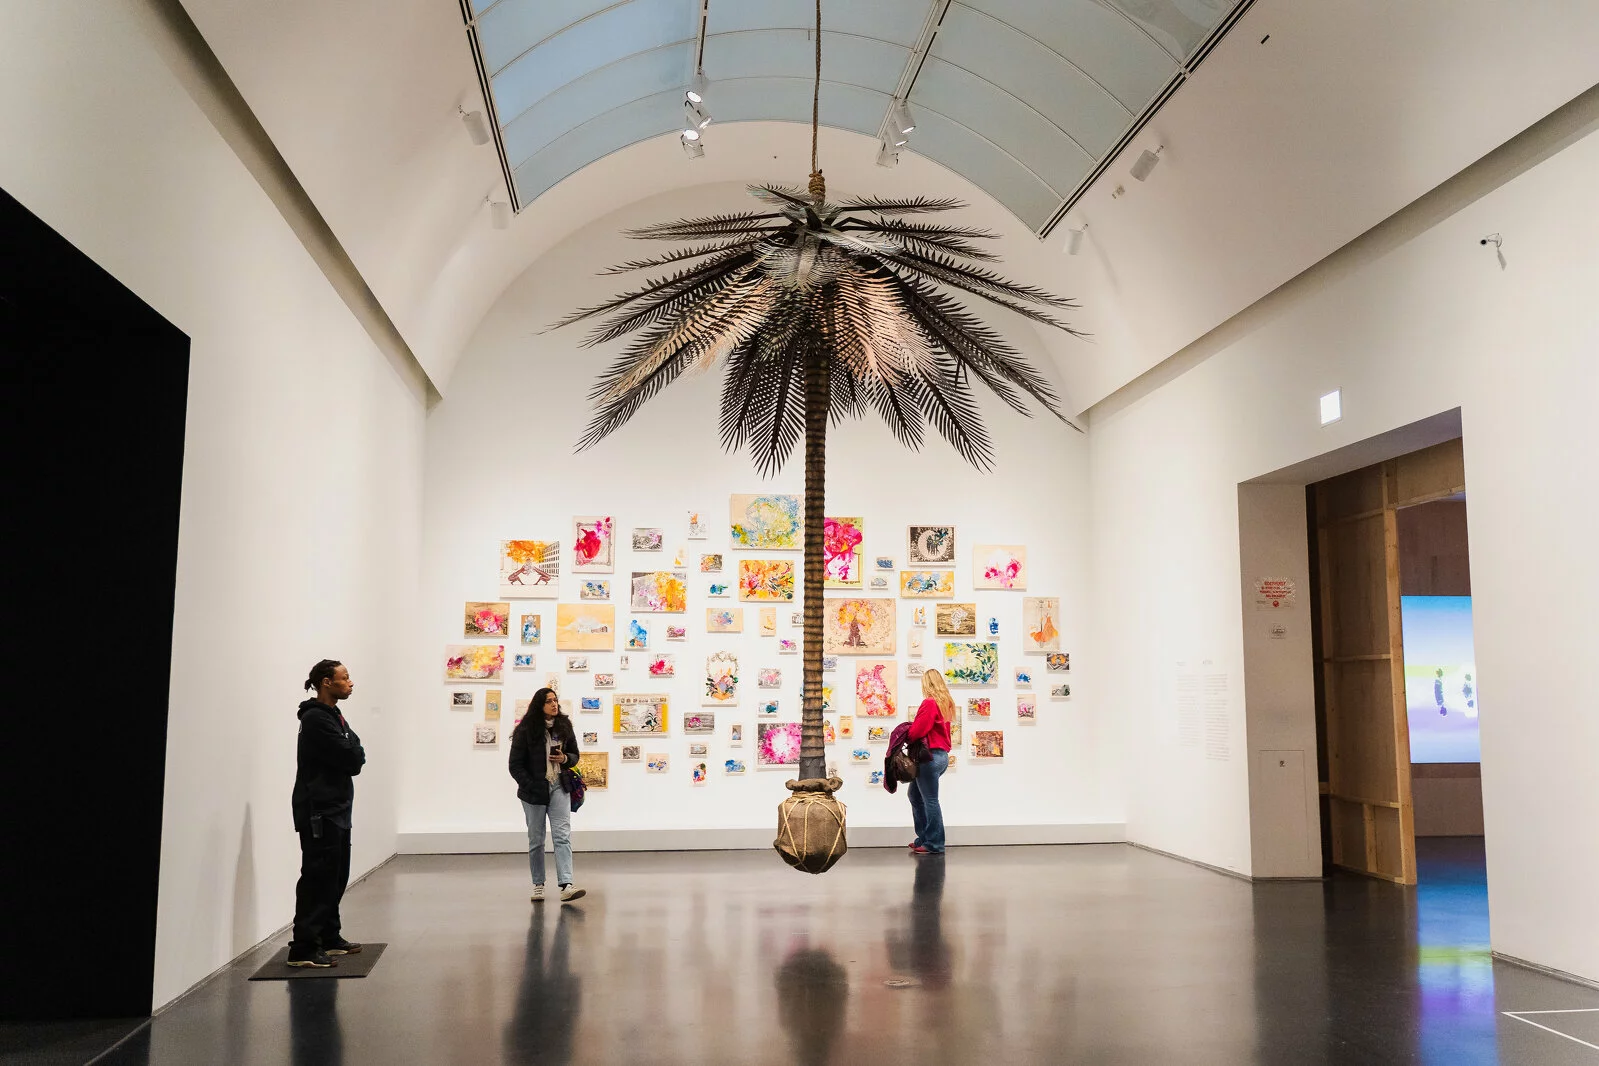 Three people stand around a palm tree hanging from the ceiling in a large room. Behind them are many colorful artworks hung on the wall in a gallery-style fashion.